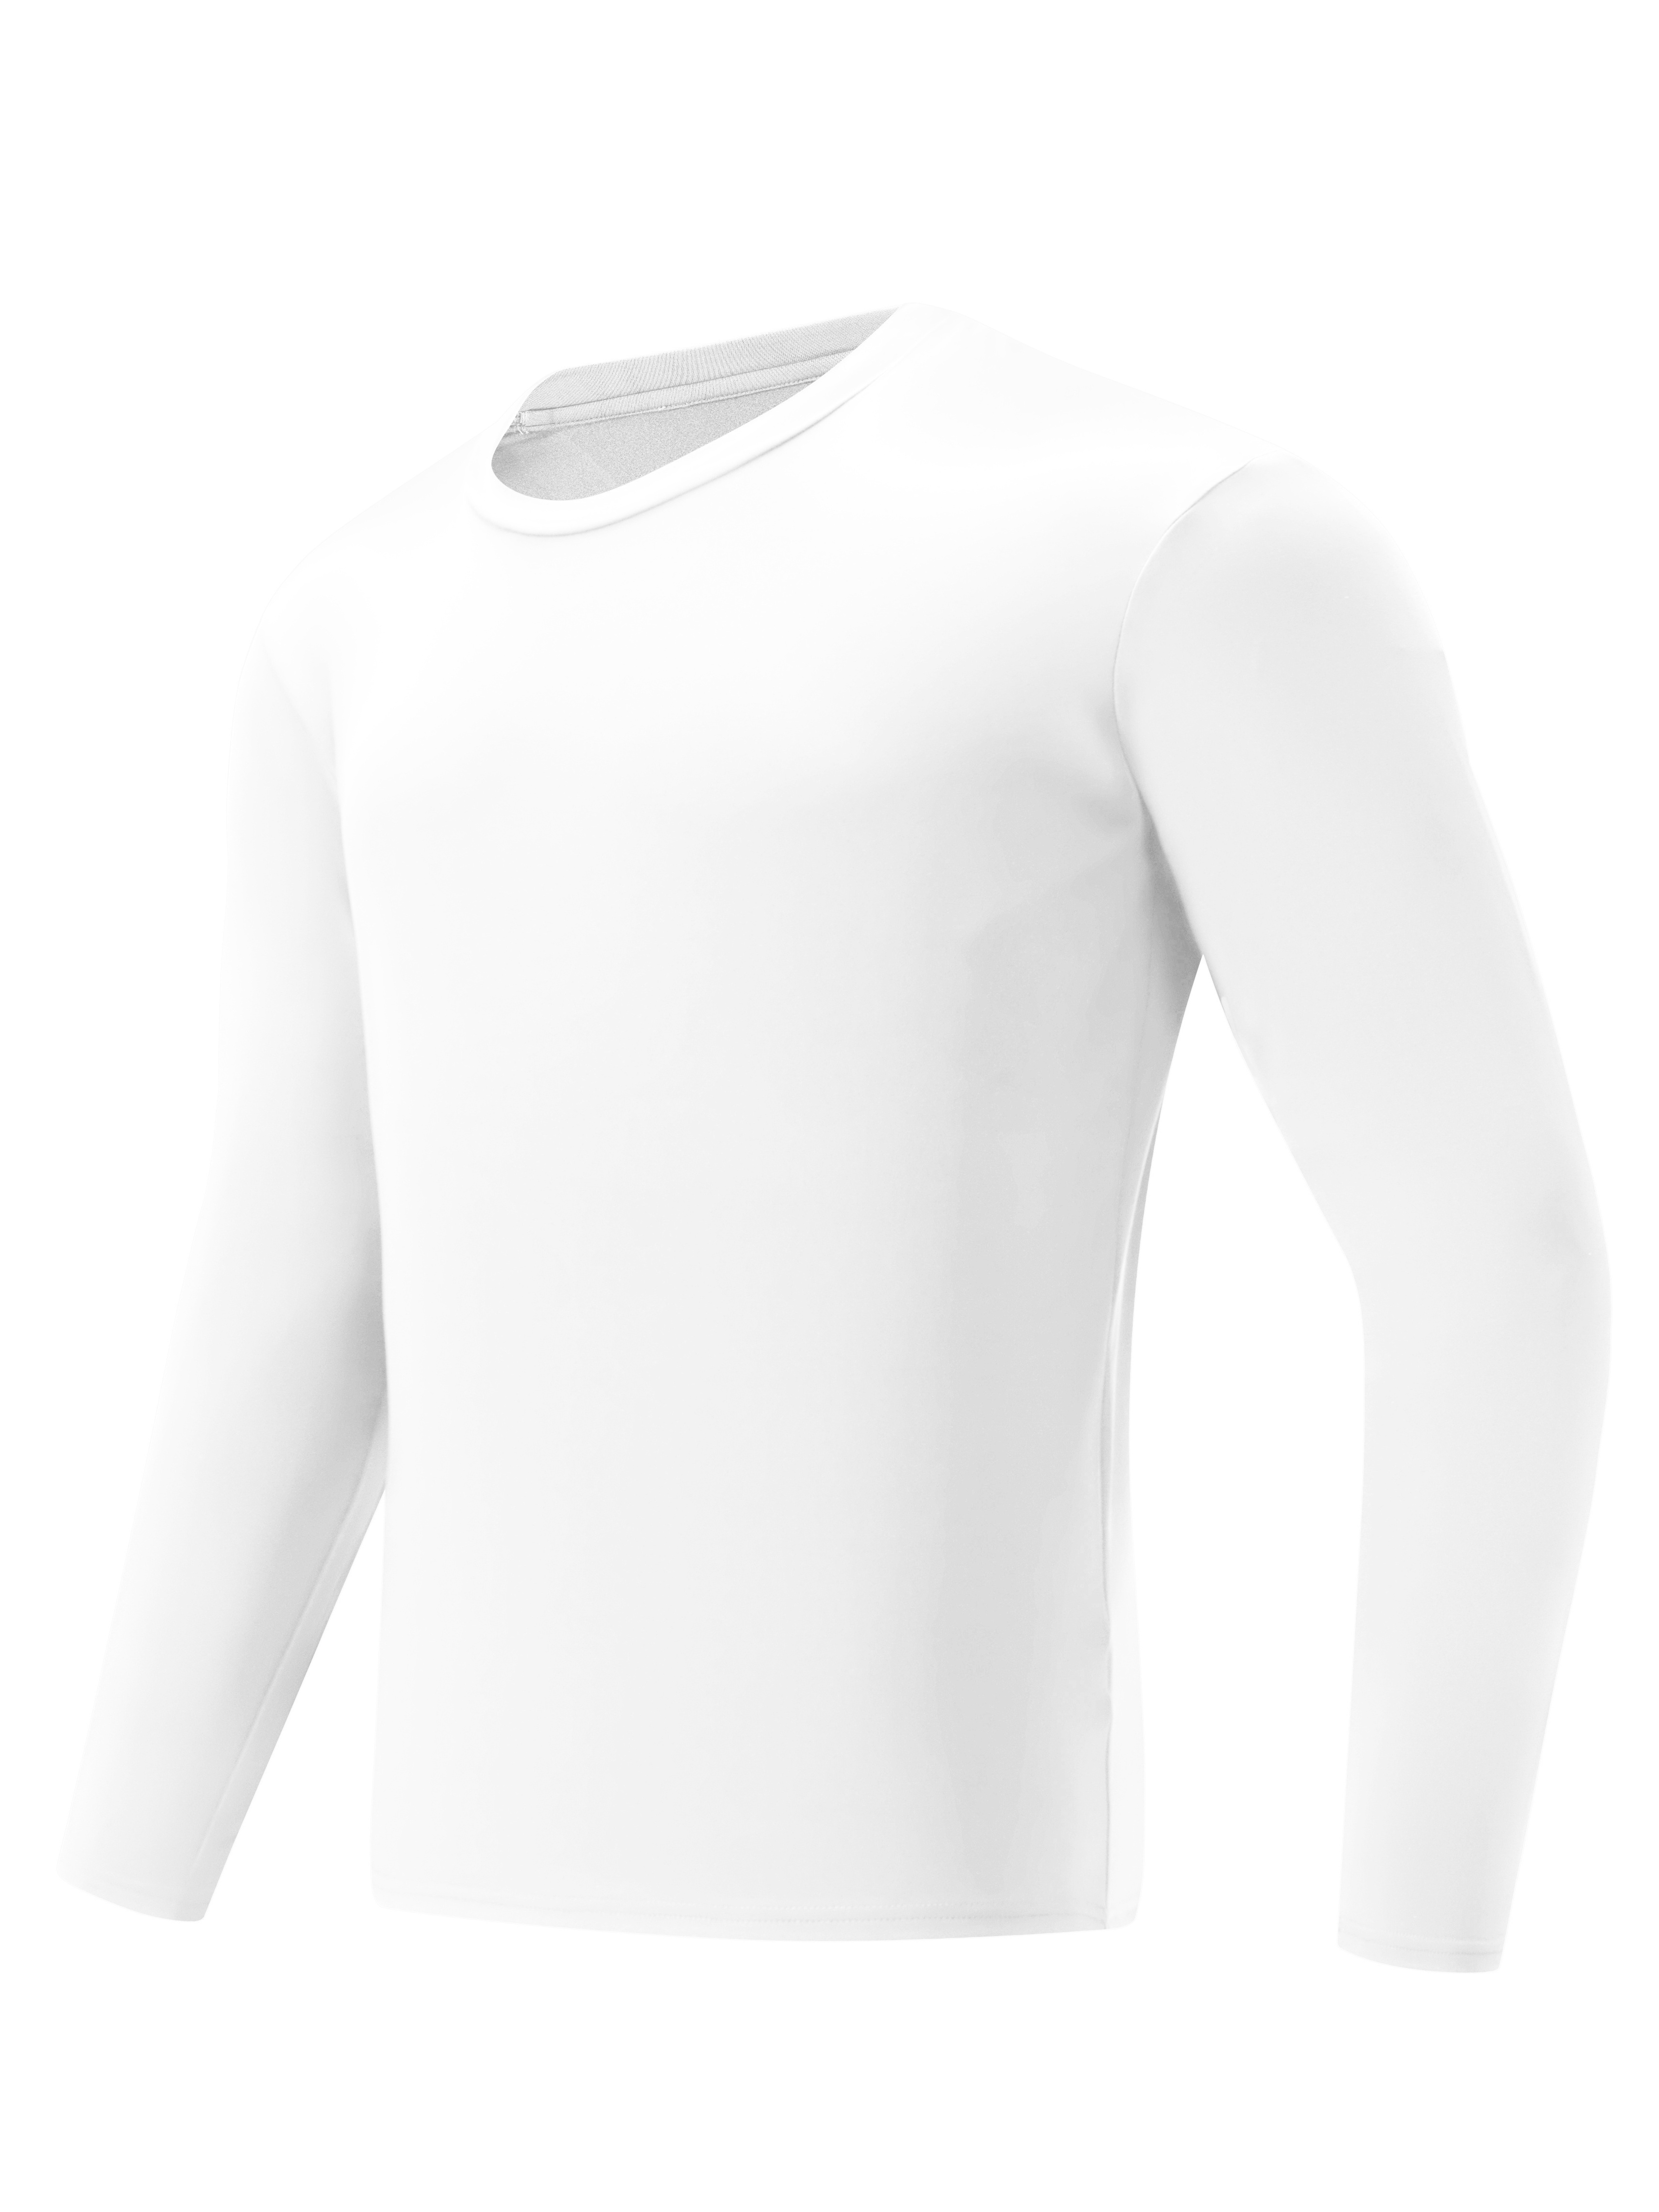  Womens Thermal Long Sleeve Tops, Mock Turtle & Crew Neck  Shirts, Fleece Lined Compression Base Layer, Mock Neck Heatlock White, X- Small